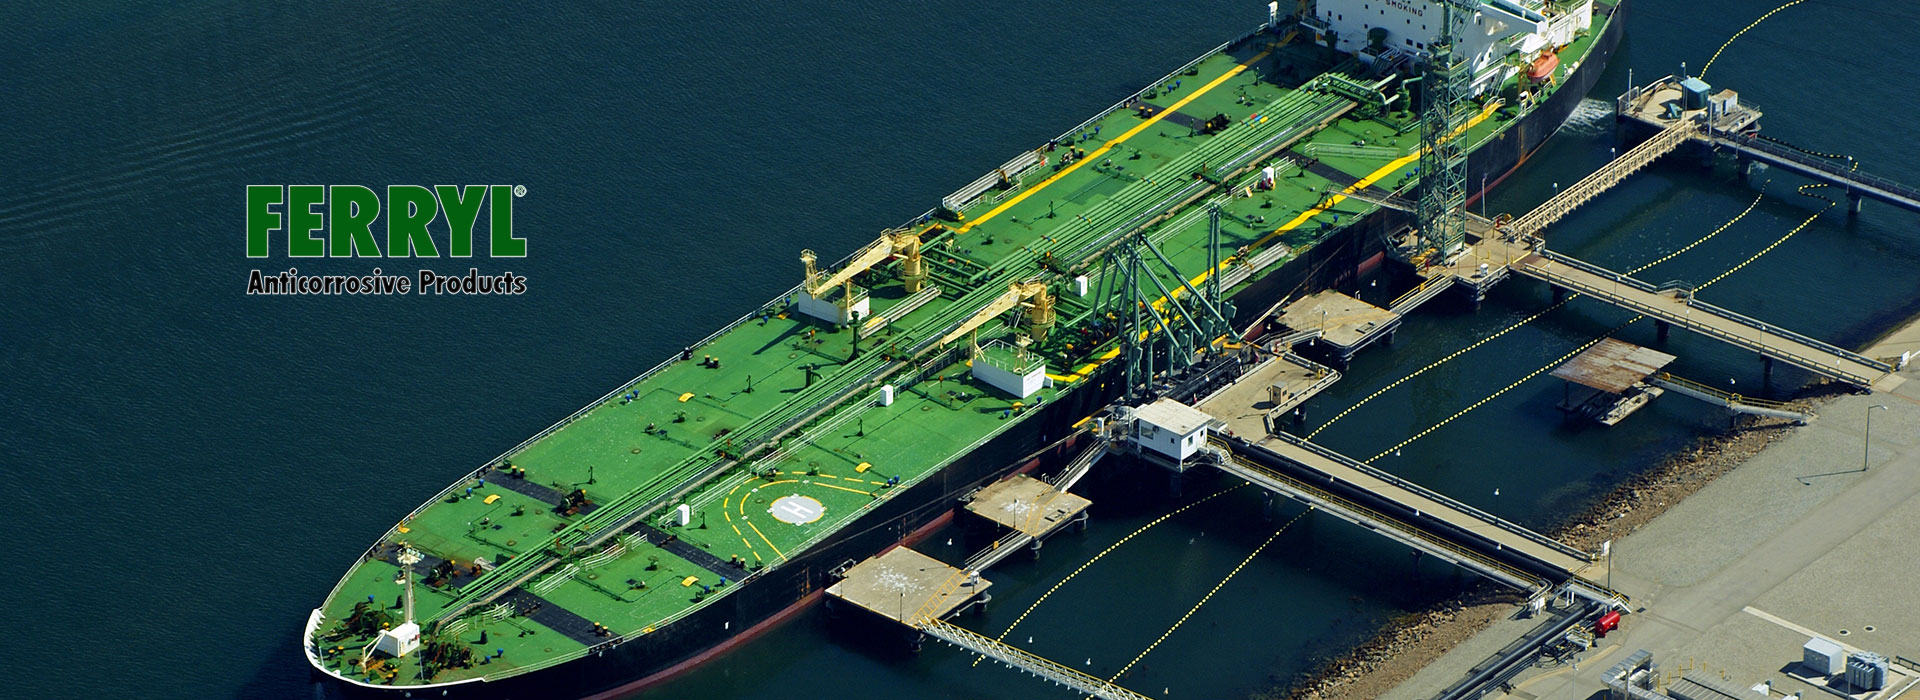 Bulk carrier lubricated with Ferryl products